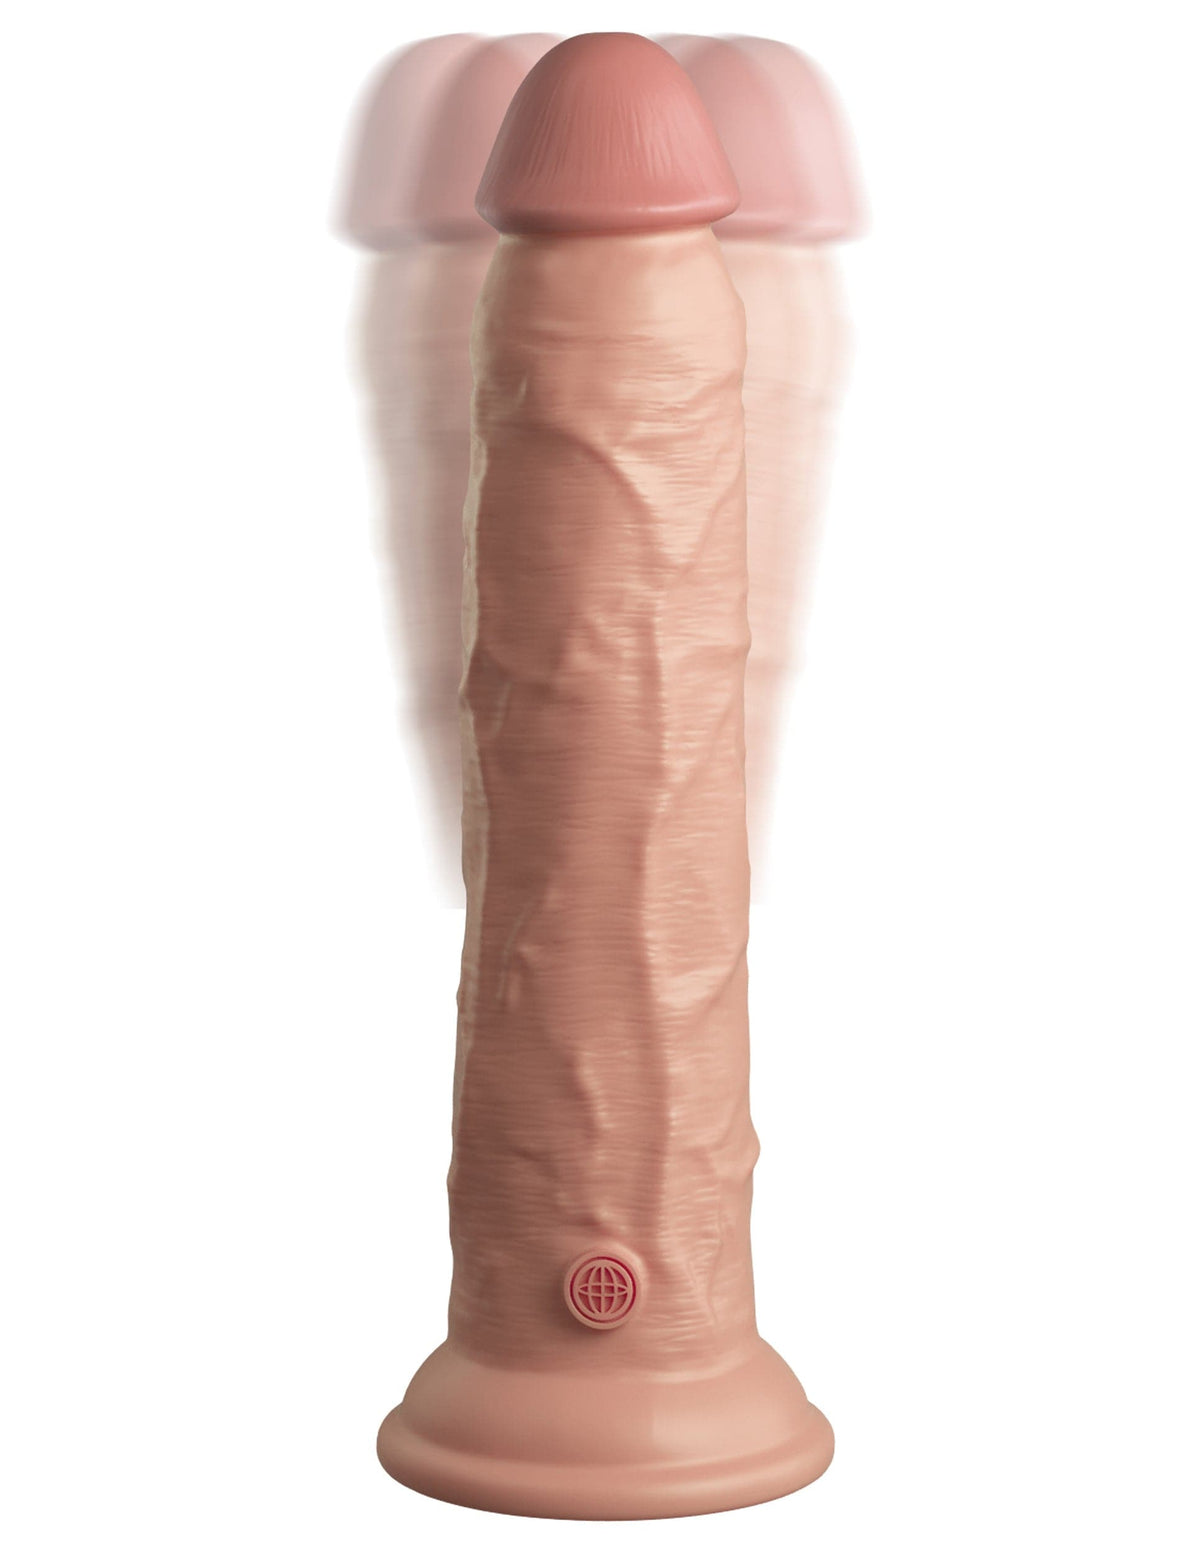 king cock elite 9 inch vibrating silicone dual density cock with remote light